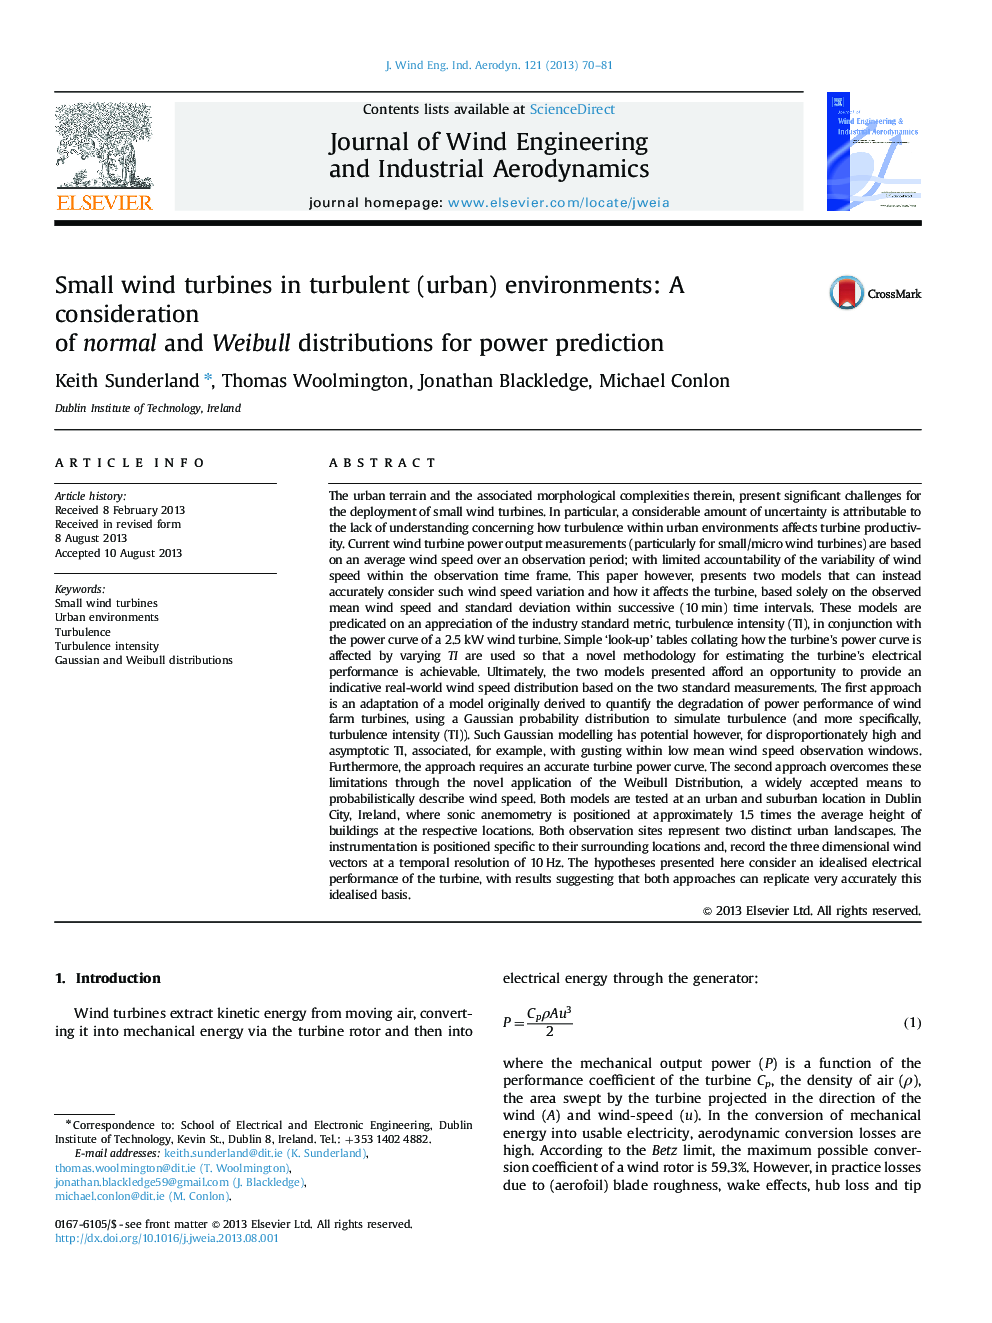 Small wind turbines in turbulent (urban) environments: A consideration of normal and Weibull distributions for power prediction